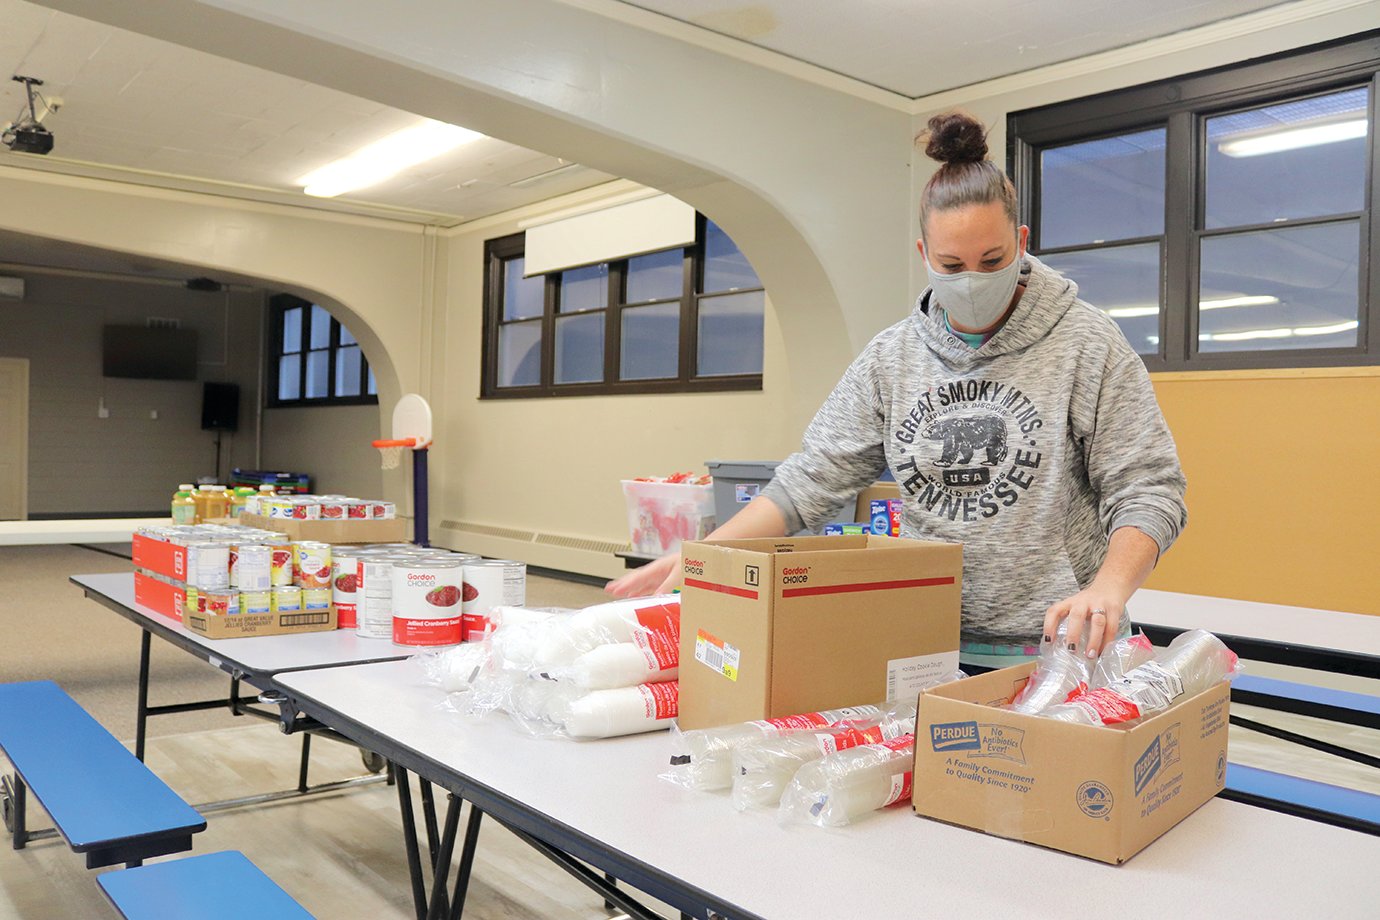 Andrea Posthauer works to organize paper and plastic products Wednesday at First United Methodist ahead of Thursday's Thanksgiving Community Dinner.